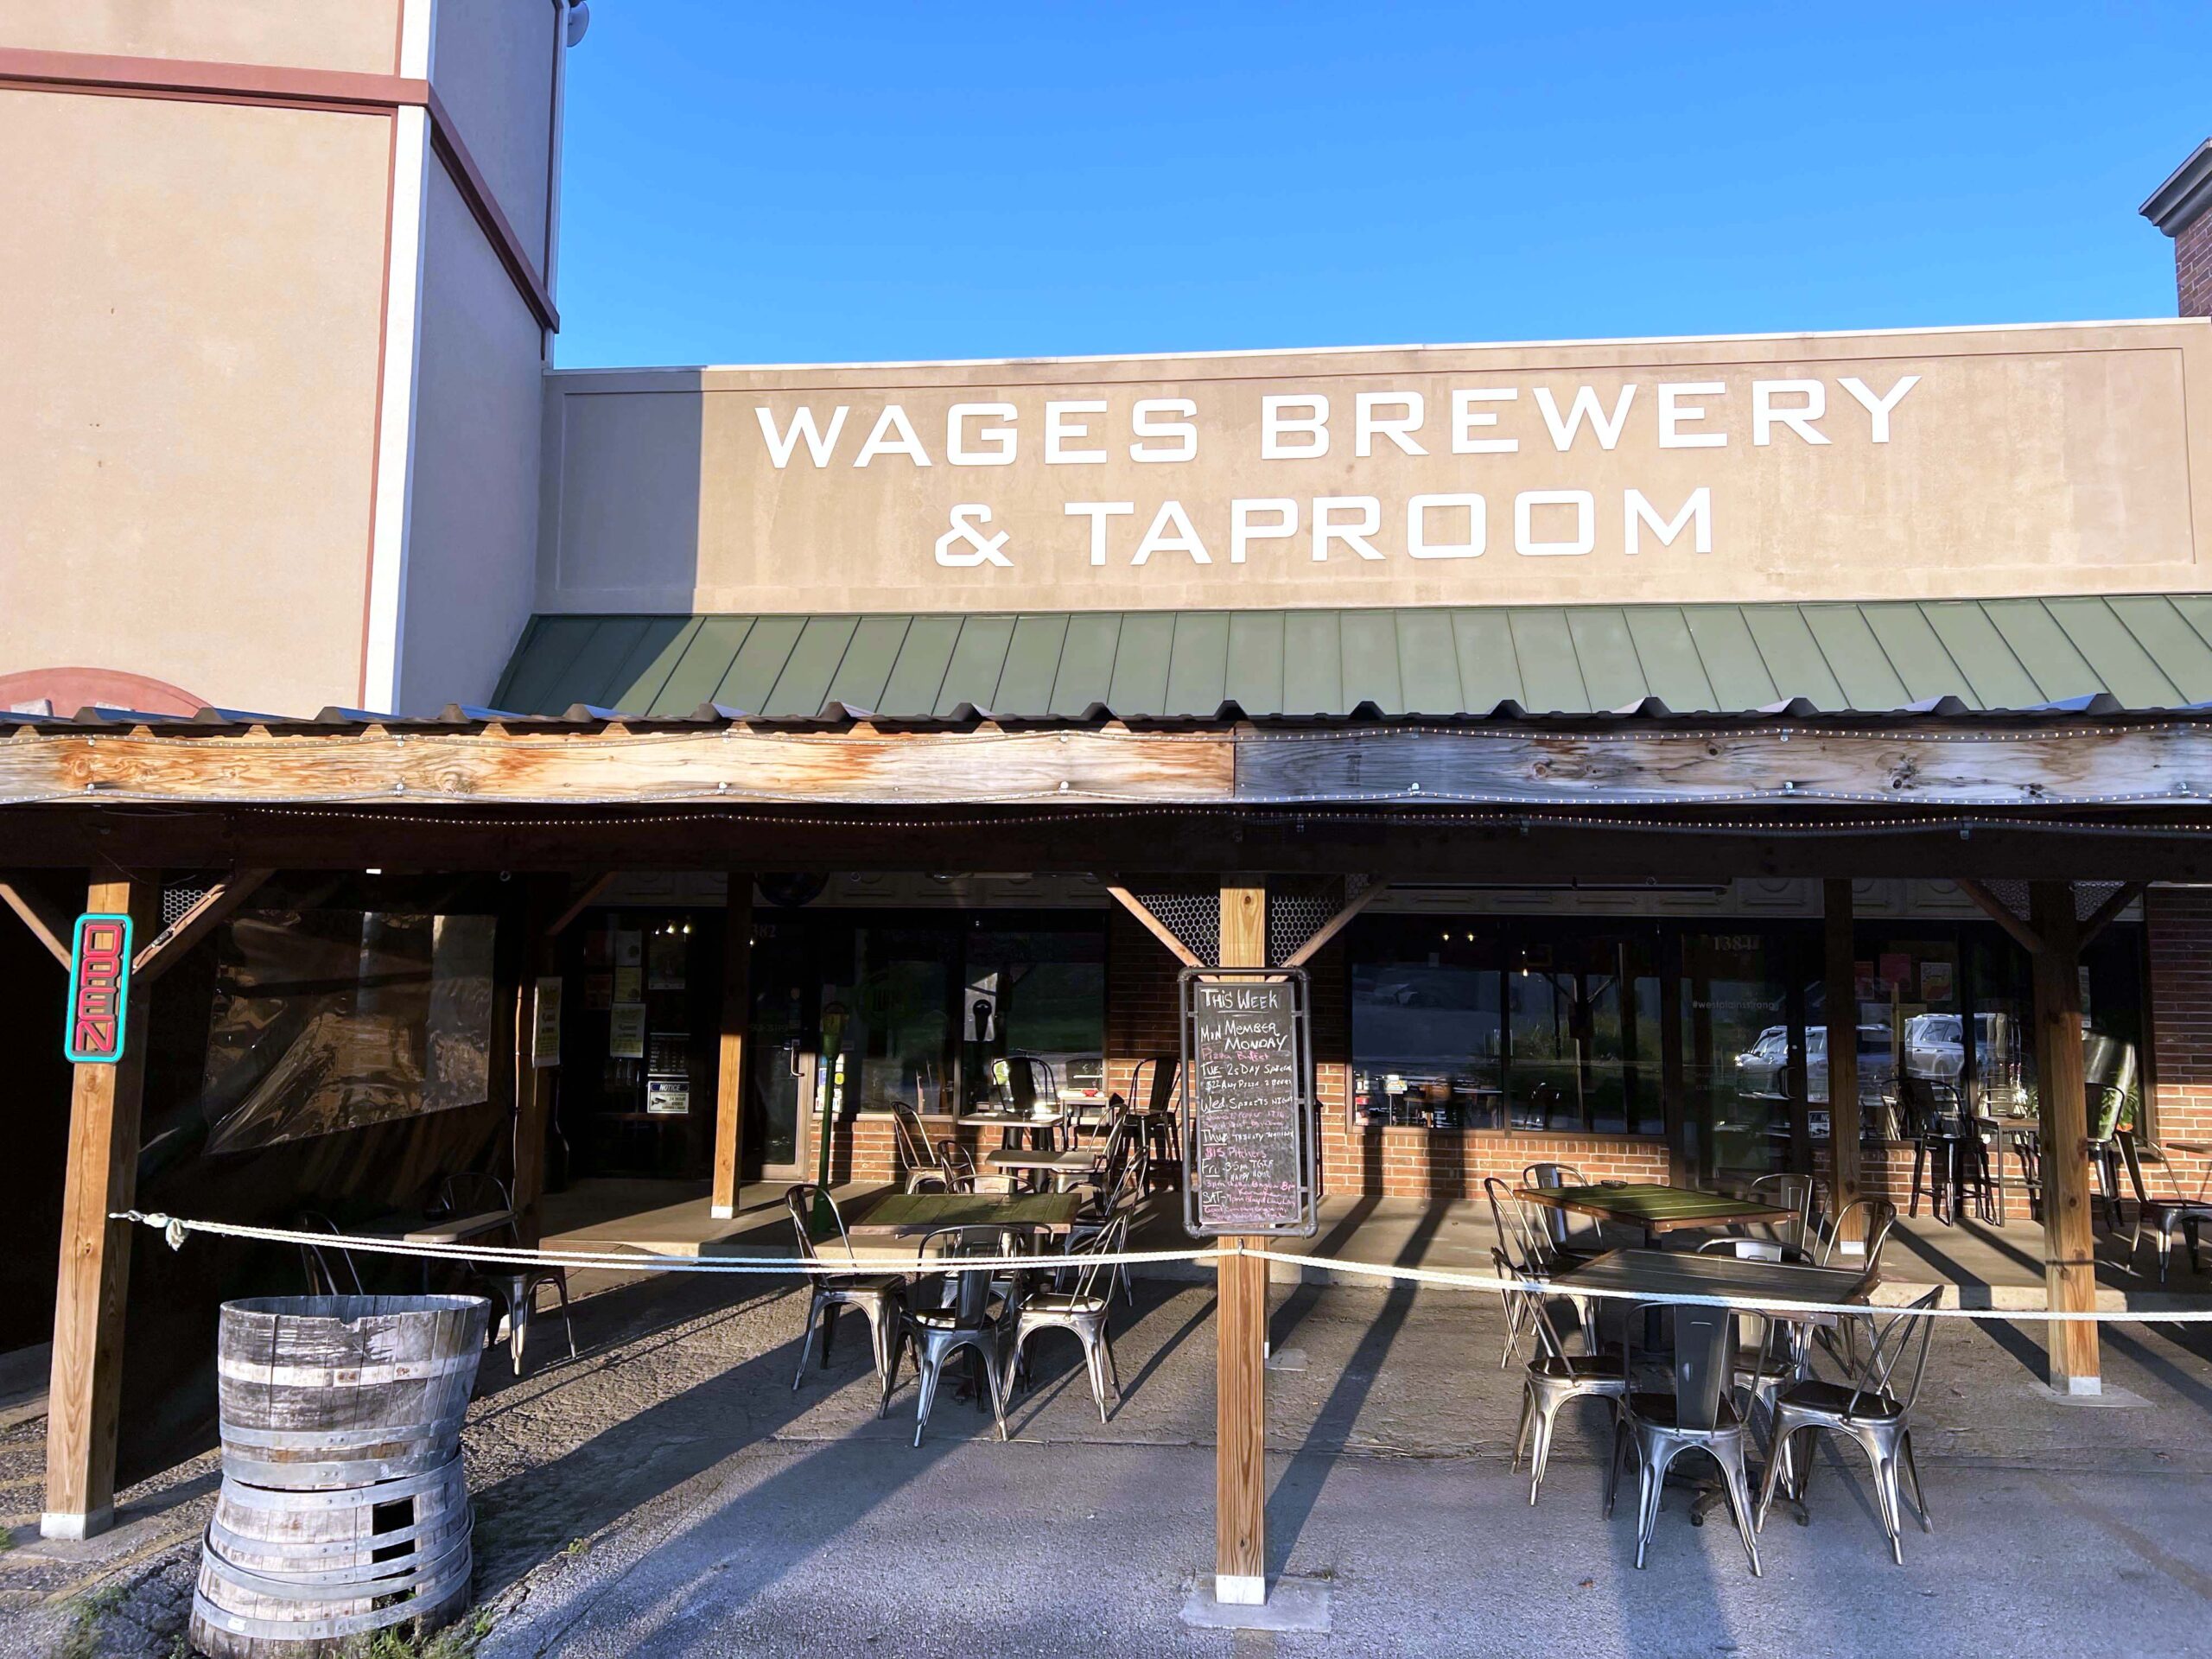 Wages Brewery & Taproom